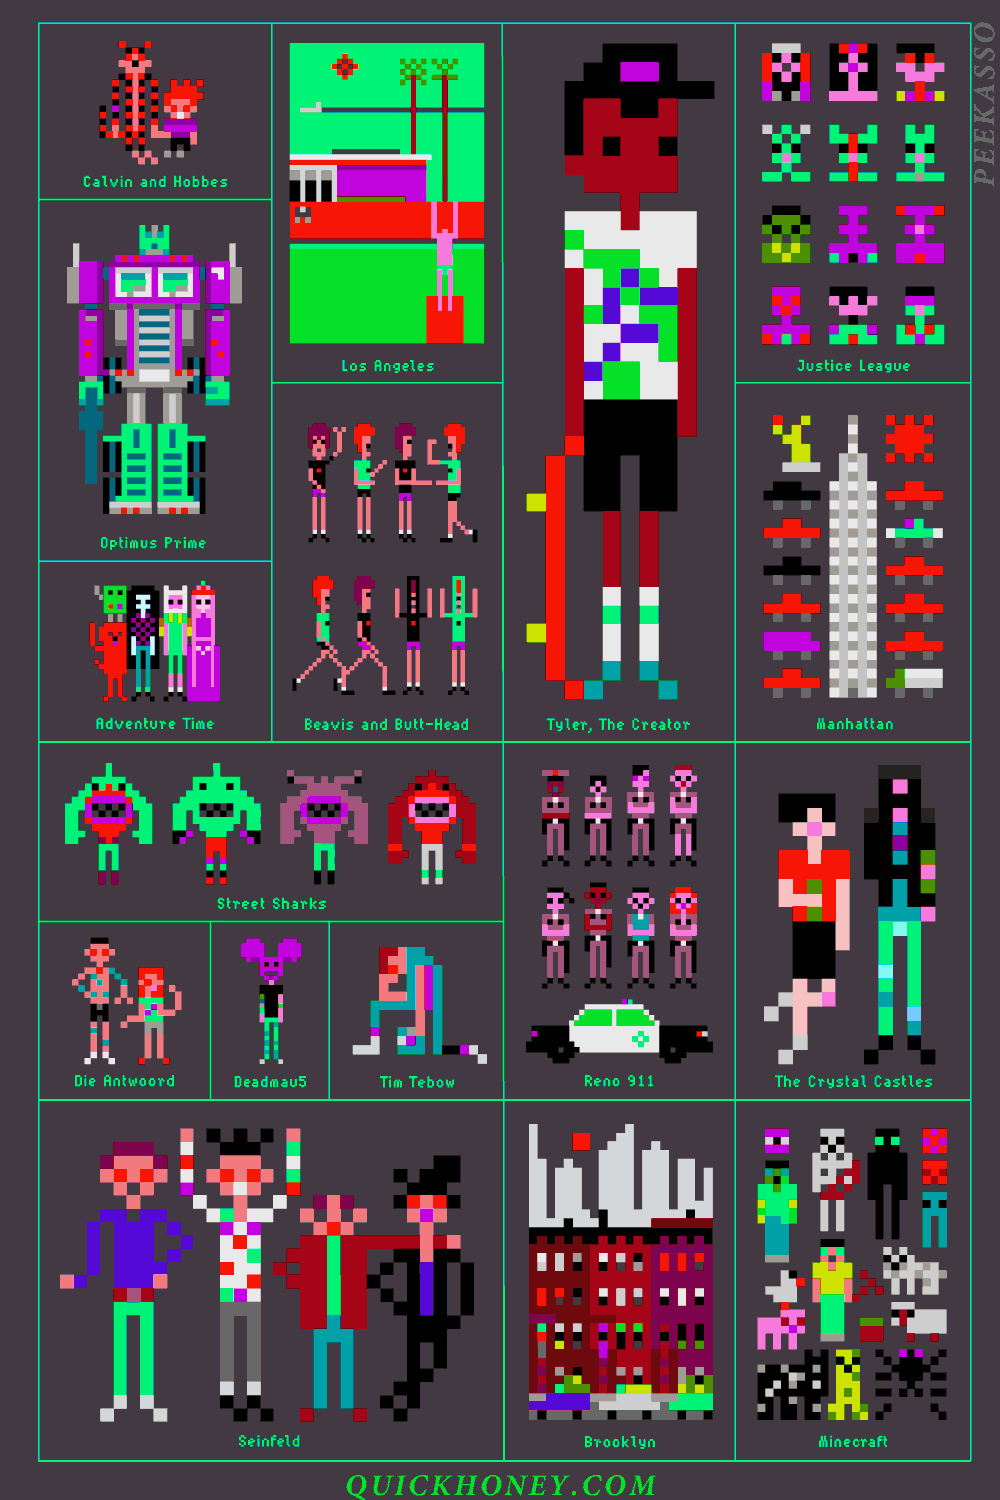 Mincraft Graphic Design 8bit GIF On GIFER By Thordigamand